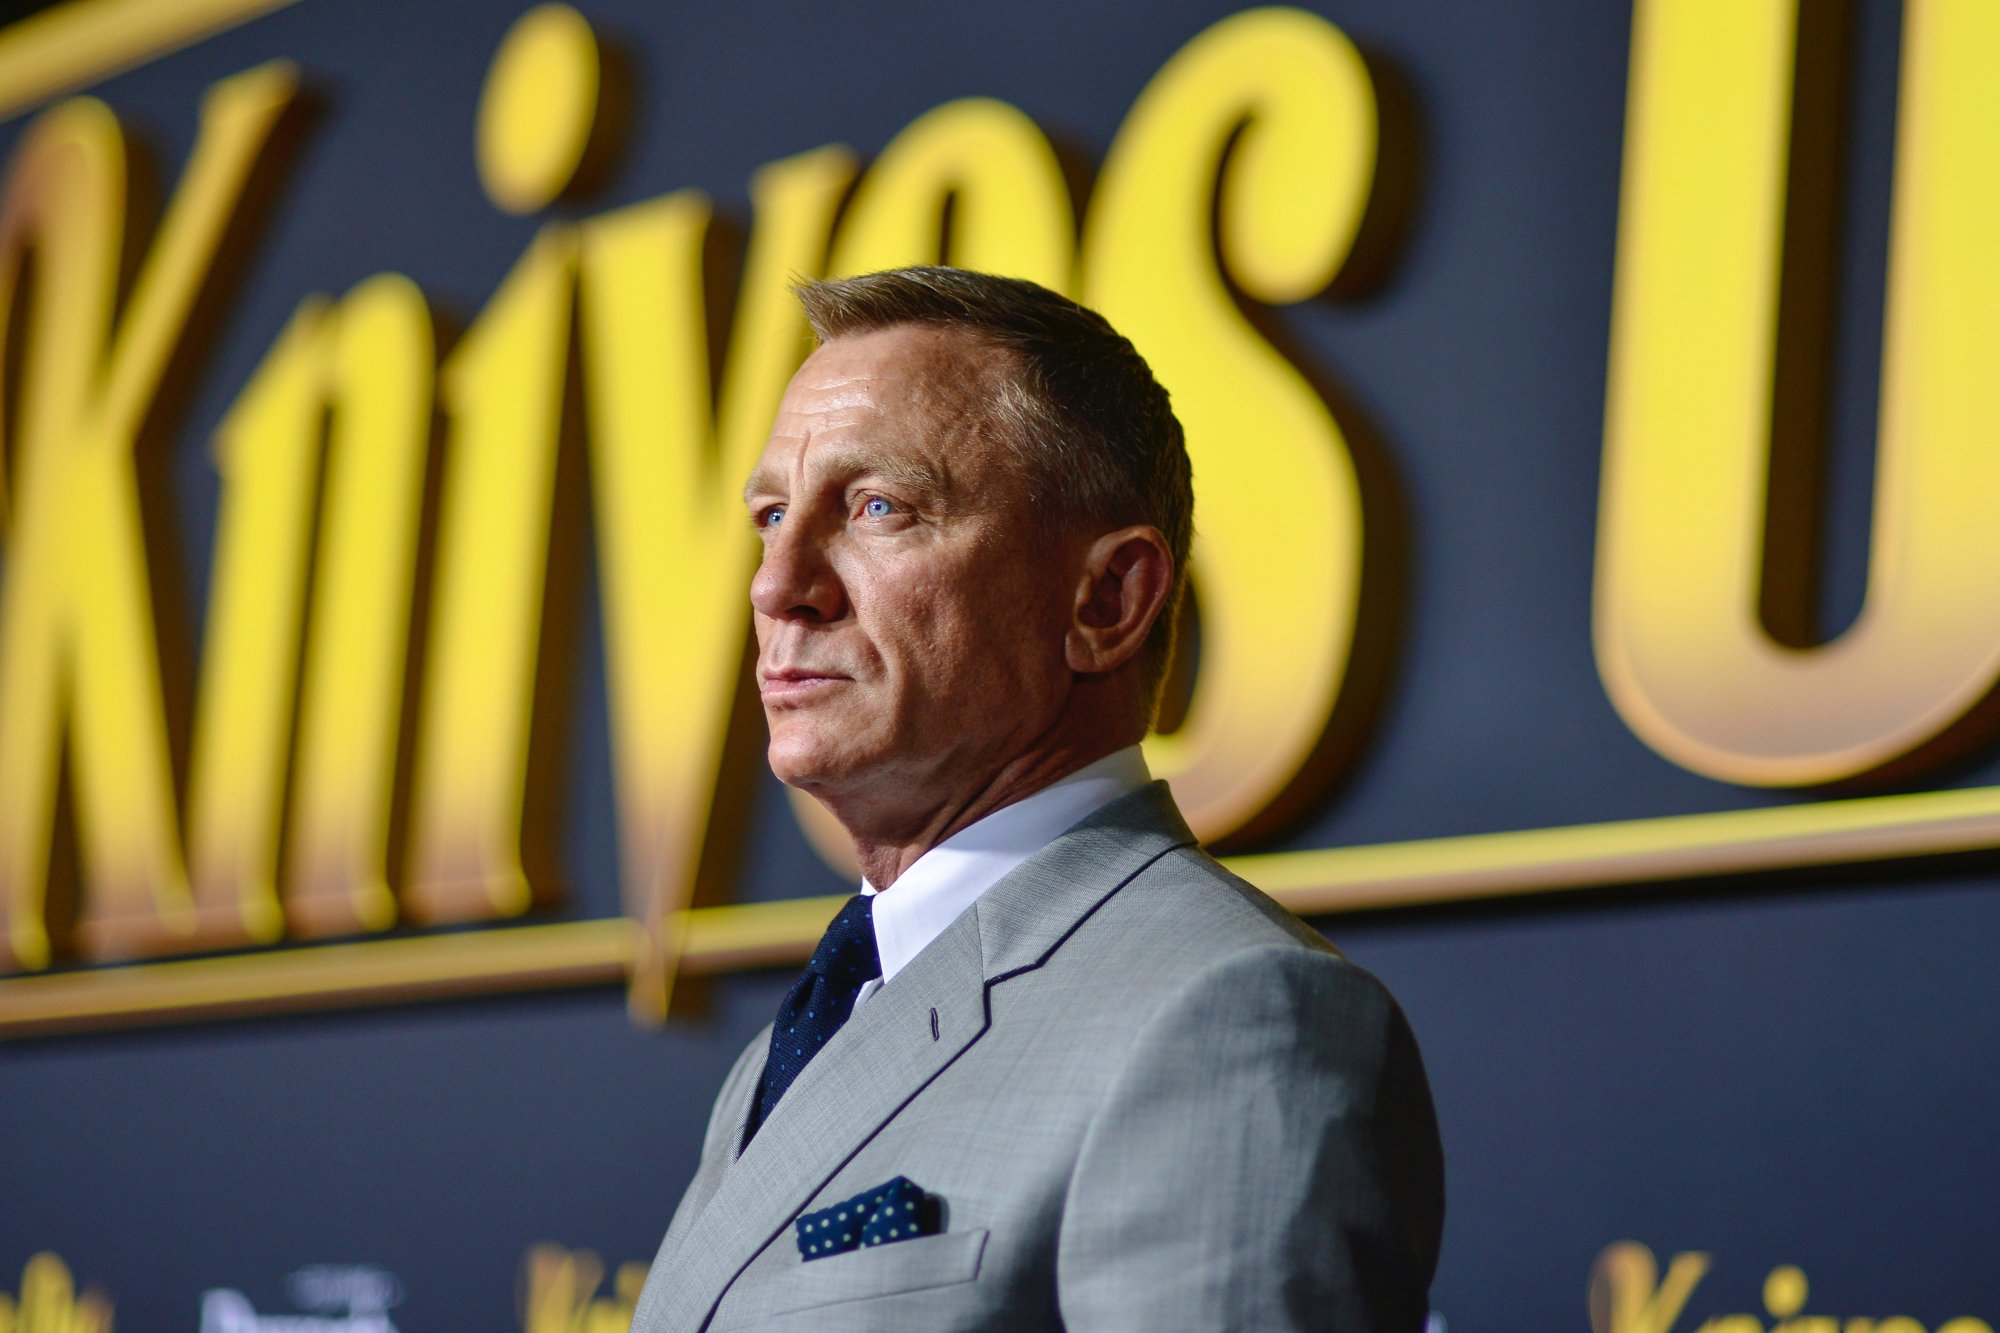 'Knives Out 2' star Daniel Craig wearing a grey suit at the 'Knives Out' premiere at Regency Village Theatre